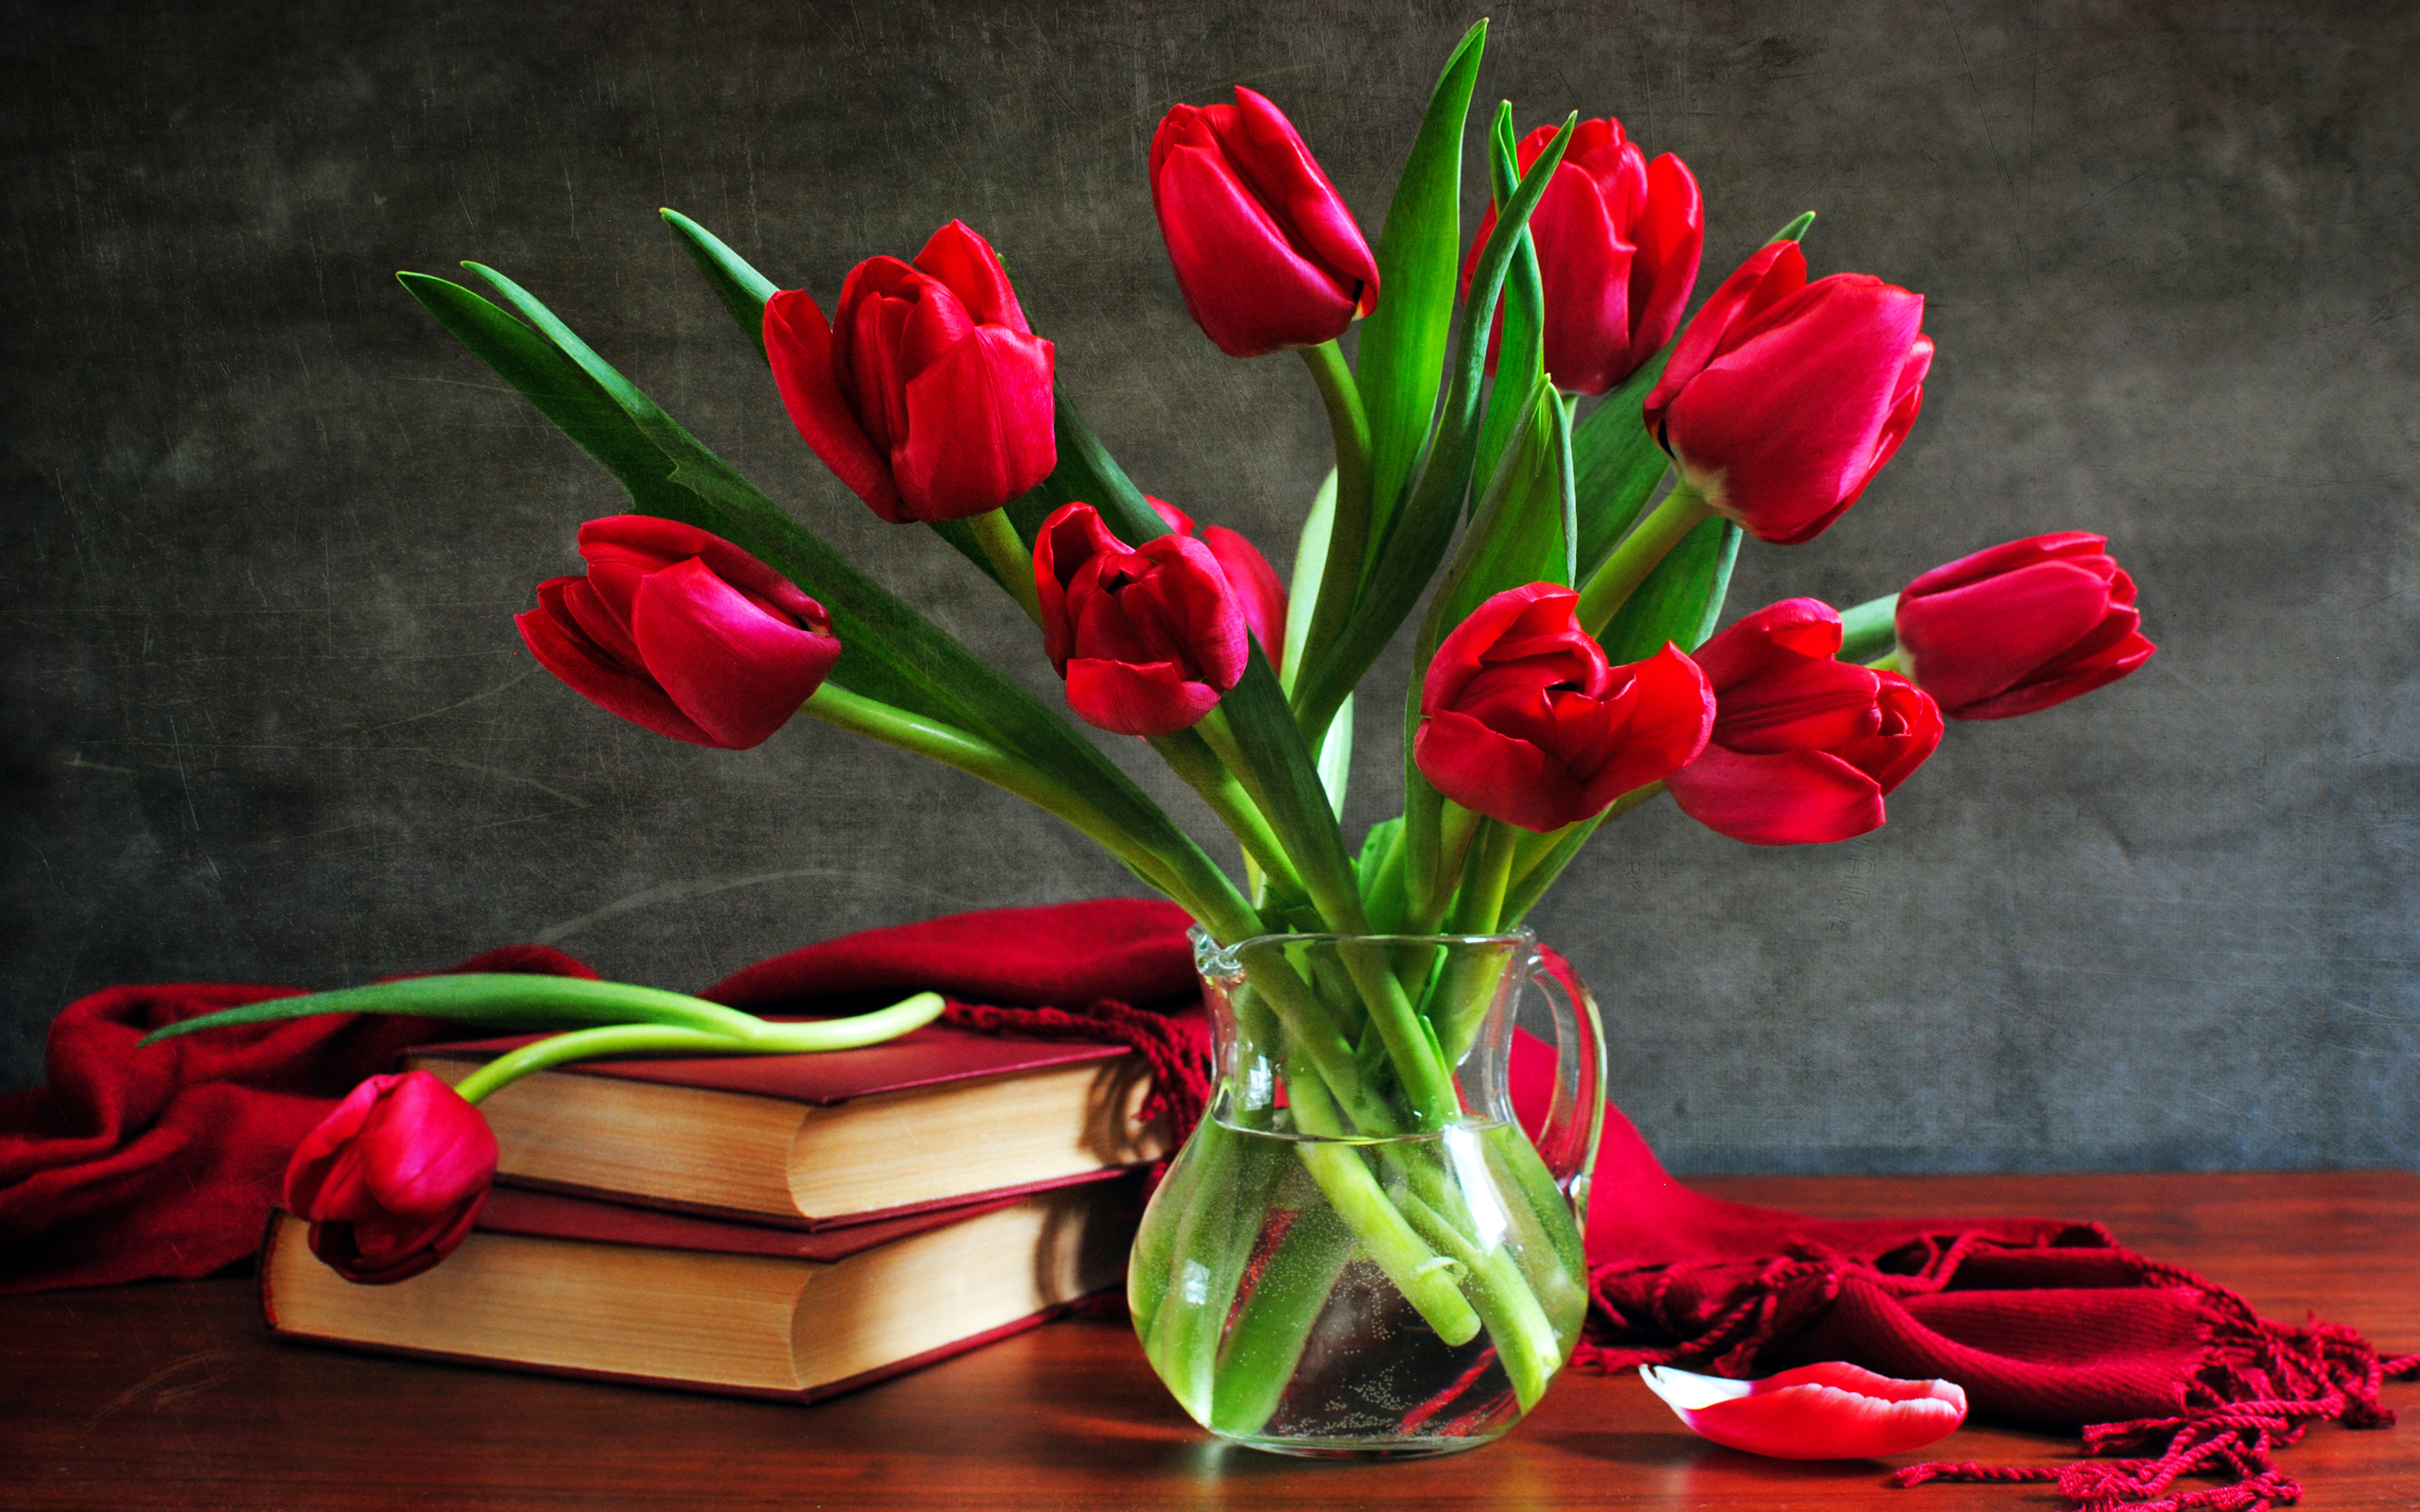 red flower, flower, tulip, still life, photography, book, pitcher, scarf Full HD